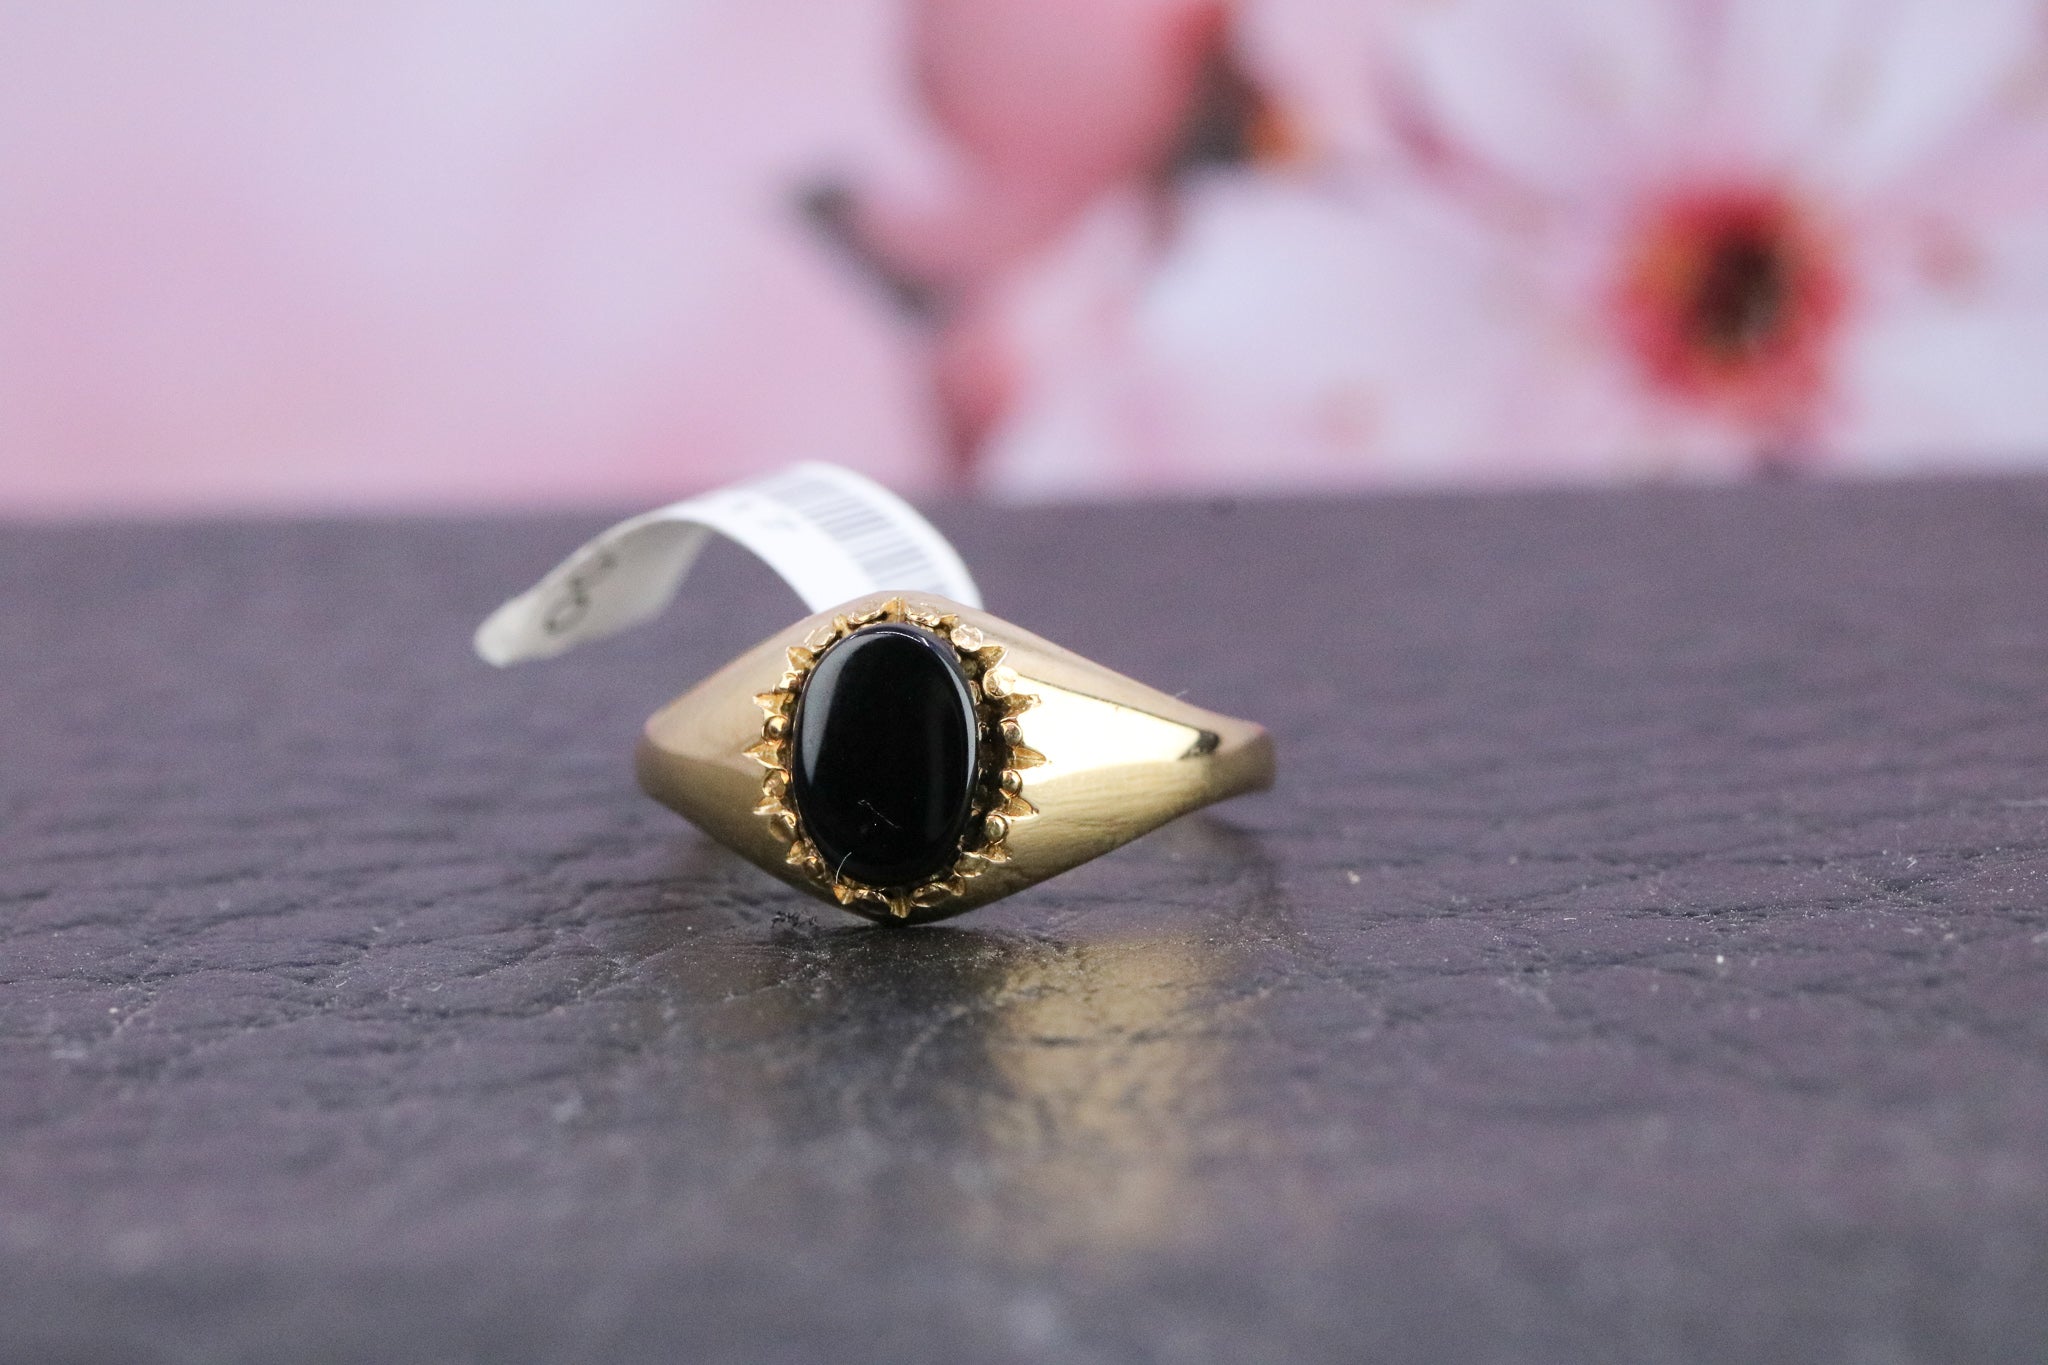 9ct Gold Onyx Ring - CO1417 - Hallmark Jewellers Formby & The Jewellers Bench Widnes